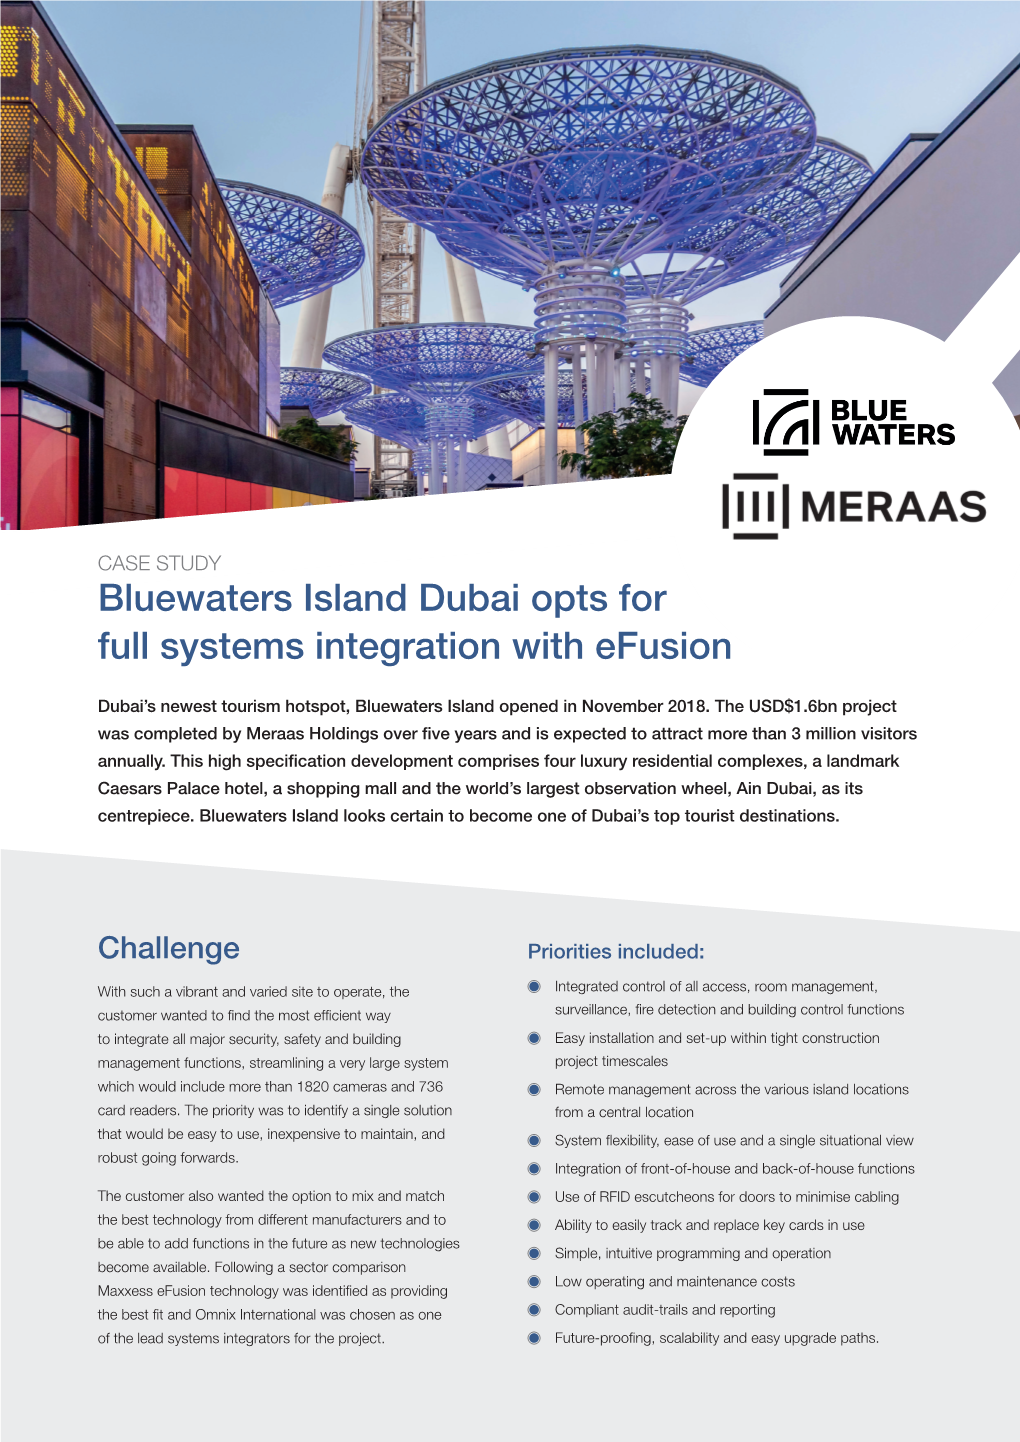 Bluewaters Island Dubai Opts for Full Systems Integration with Efusion